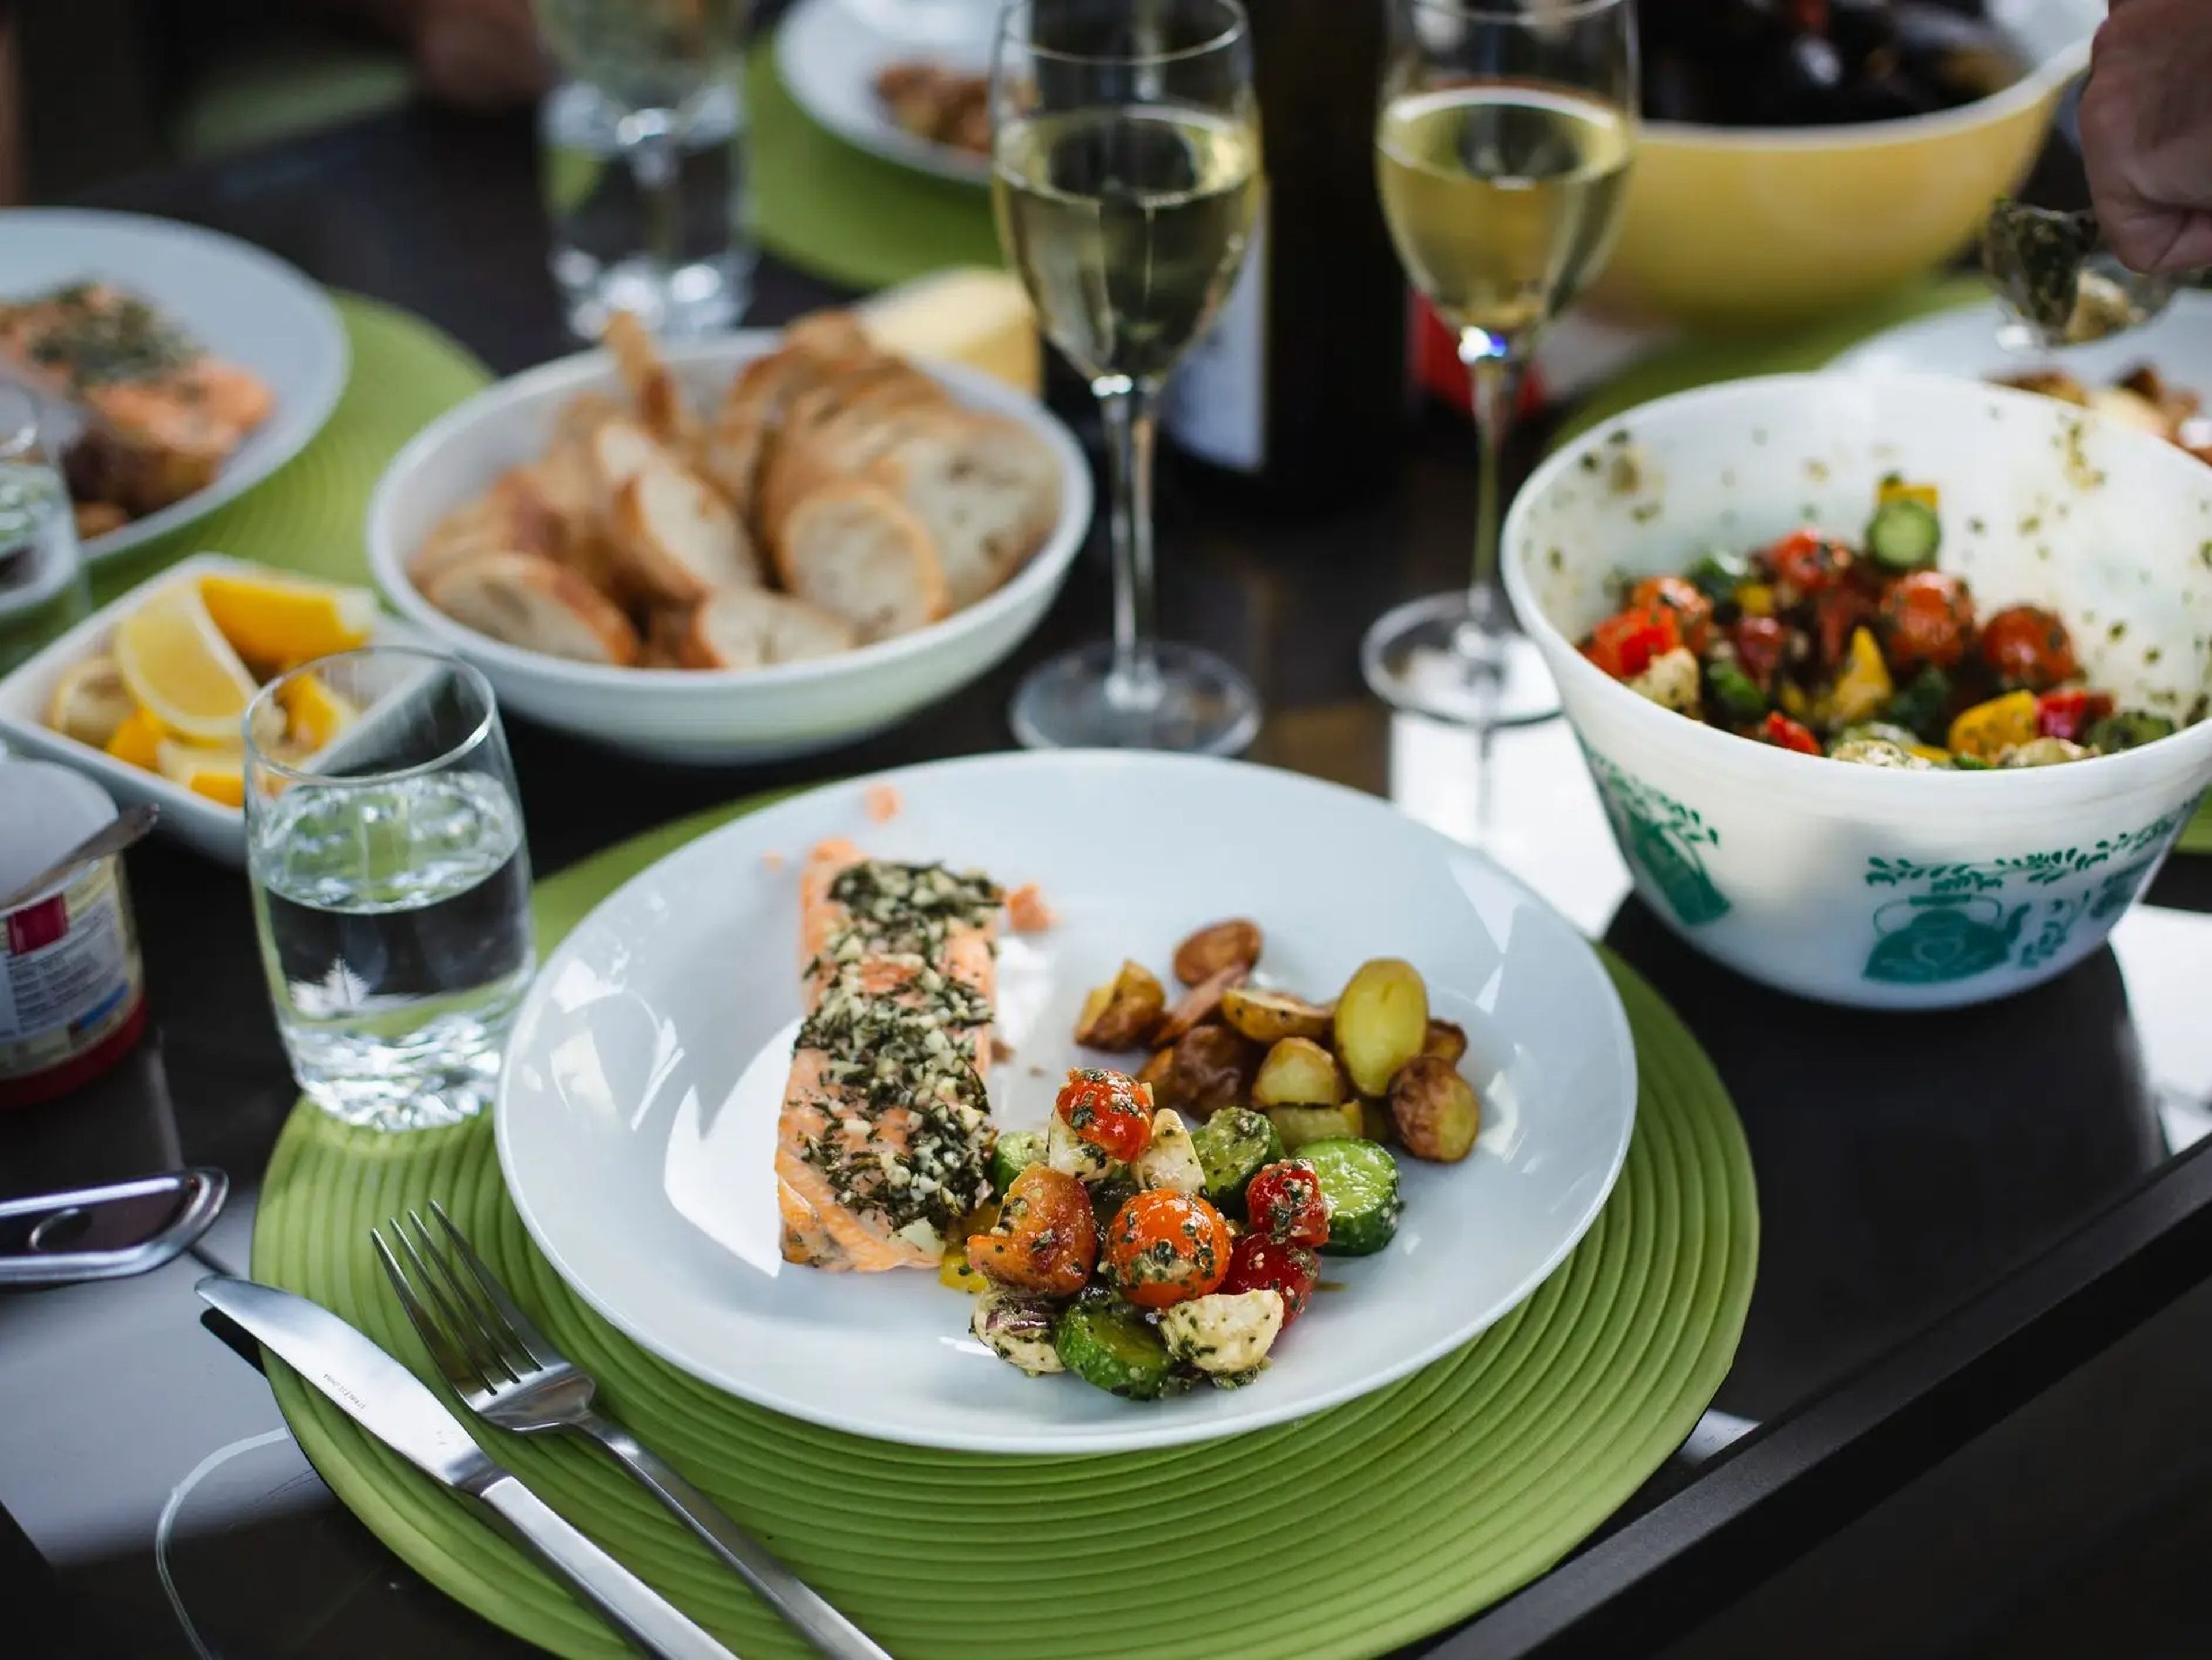 Mediterranean diet meal with salmon, wine, and vegetables